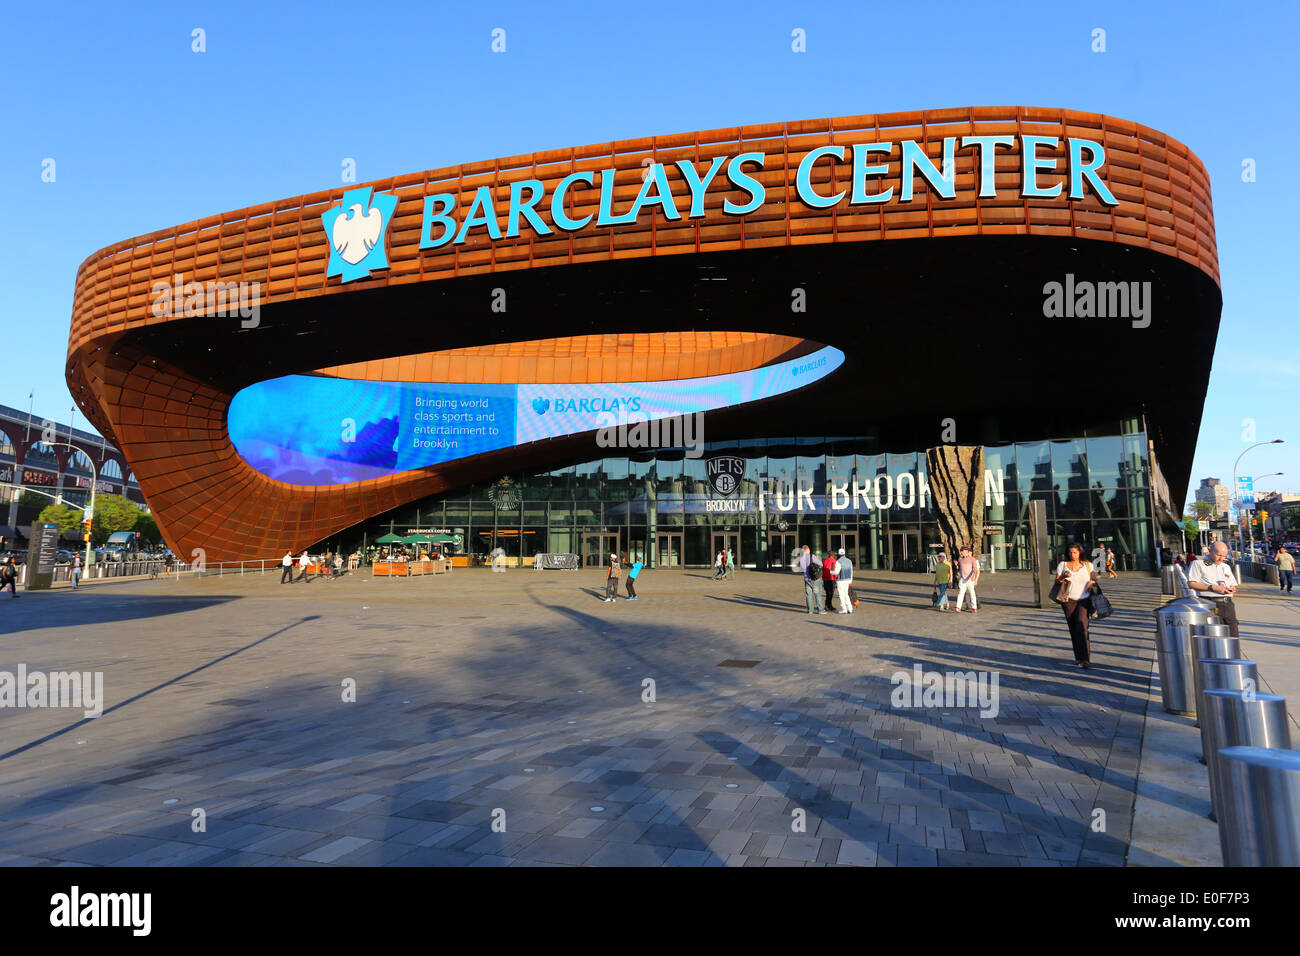 Barclays Center Sports Arena à Brooklyn, New York. Banque D'Images